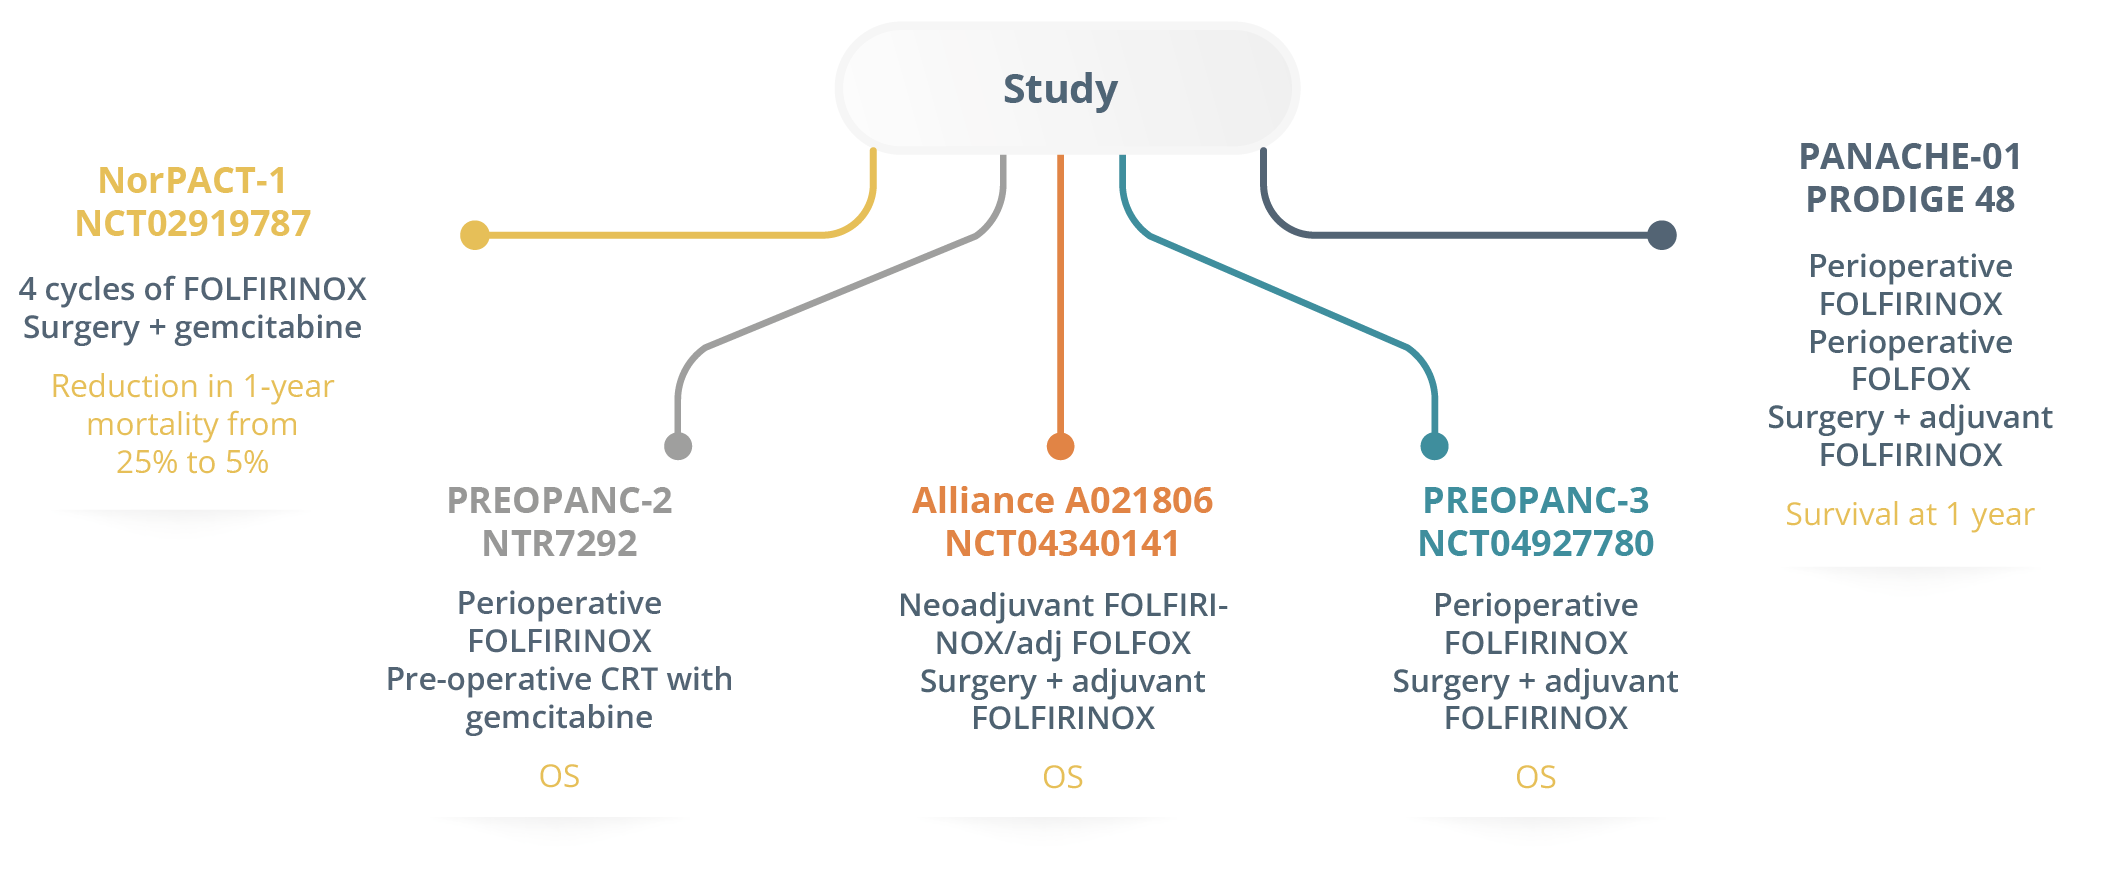 Ongoing randomised phase III trials in resectable PC include NorPACT-1, PREOPANC-2